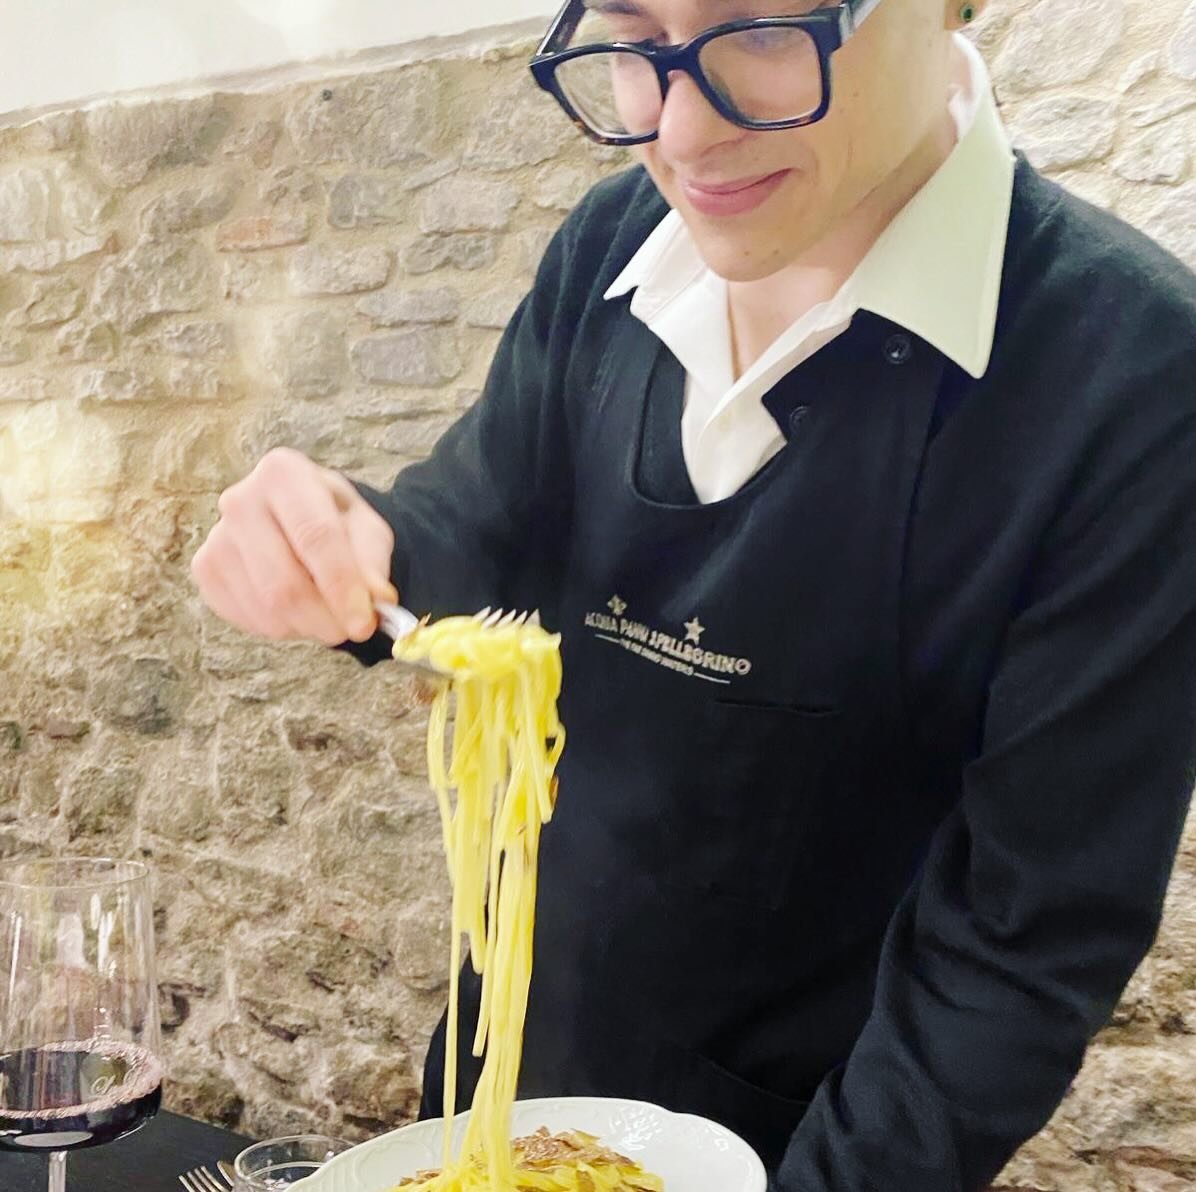 What&rsquo;s not to love about Italy and white truffles! At La Loggetta in Cortona. @la_loggetta_cortona 

+
I am Sally Uhlmann. My passion for cooking led me to publish my first memoir-style cookbook, released when I moved to Europe. I love to trave